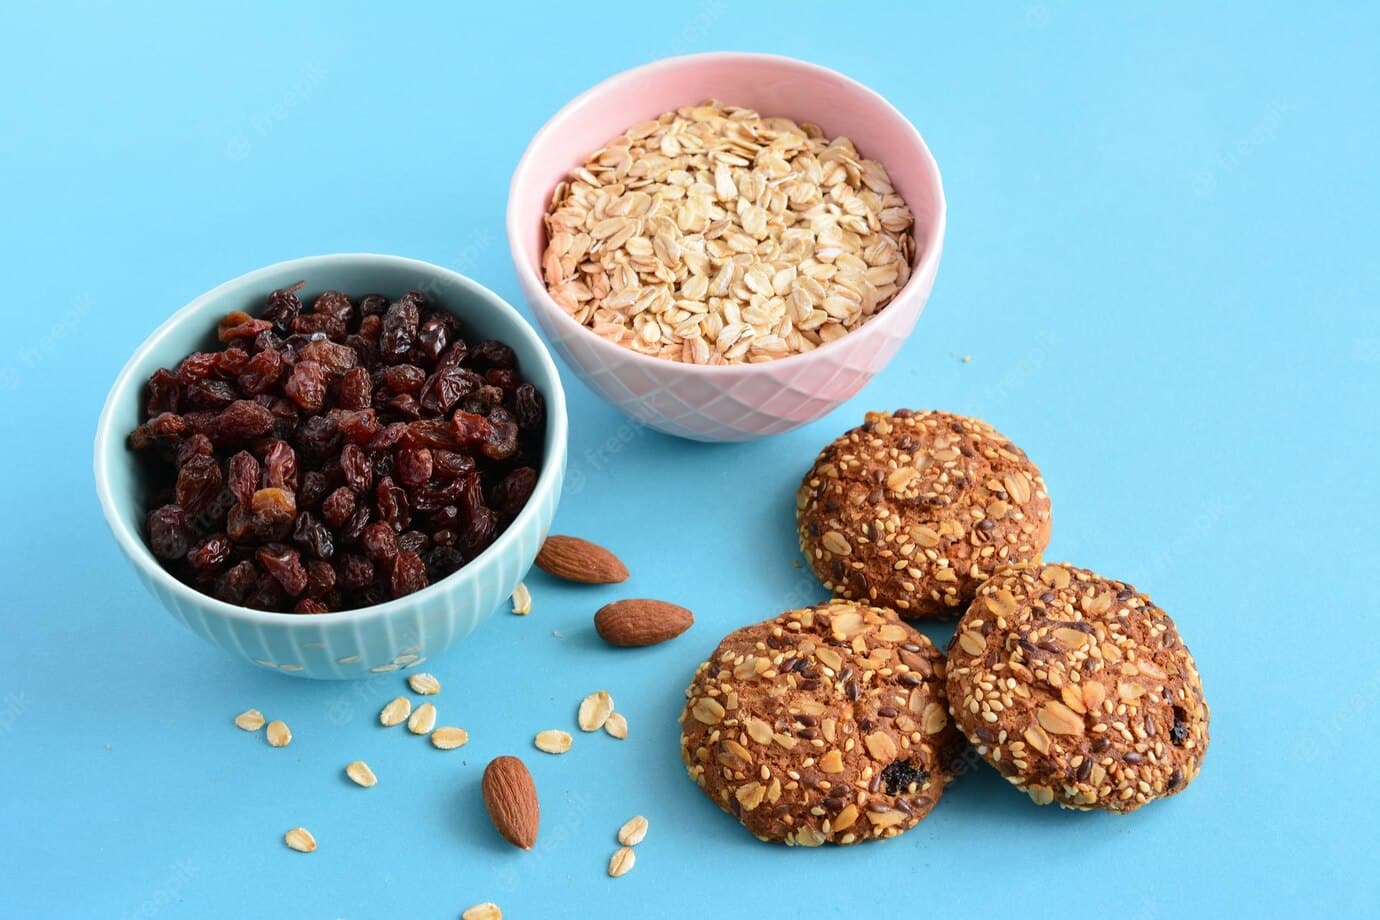 blue-pink-bowls-with-raisin-oatmeal-oat-cookies-blue-background_715893-1161